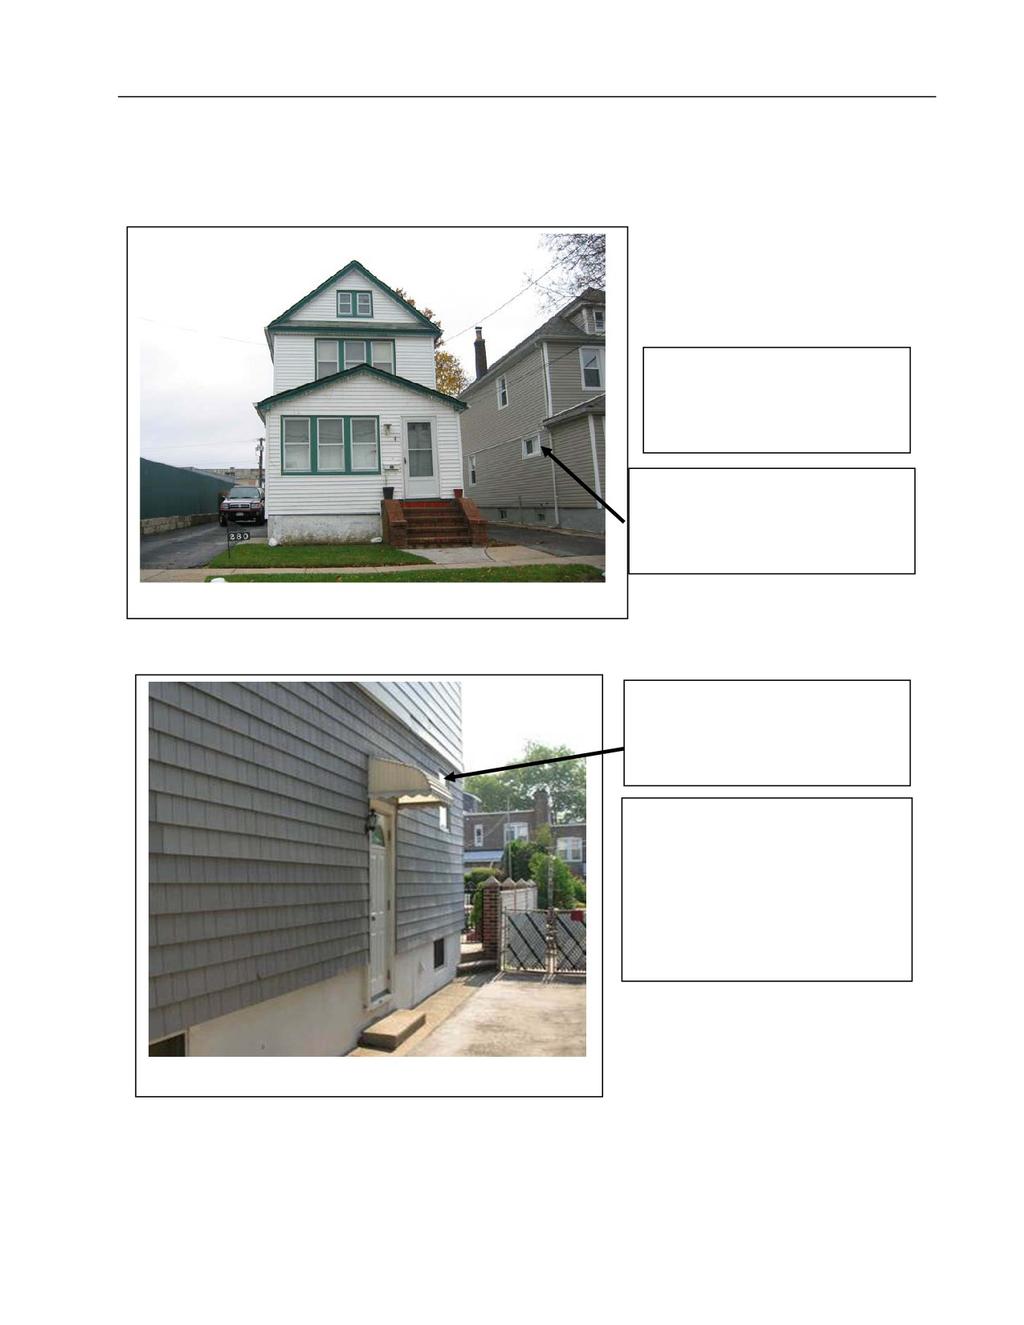 2.9 Street Conditions Overhead wires, trees, narrow streets, and houses set back from the street, may interfere with ladder apparatus placement. Photo 2.1 shows a typical 2½ story wood frame house.